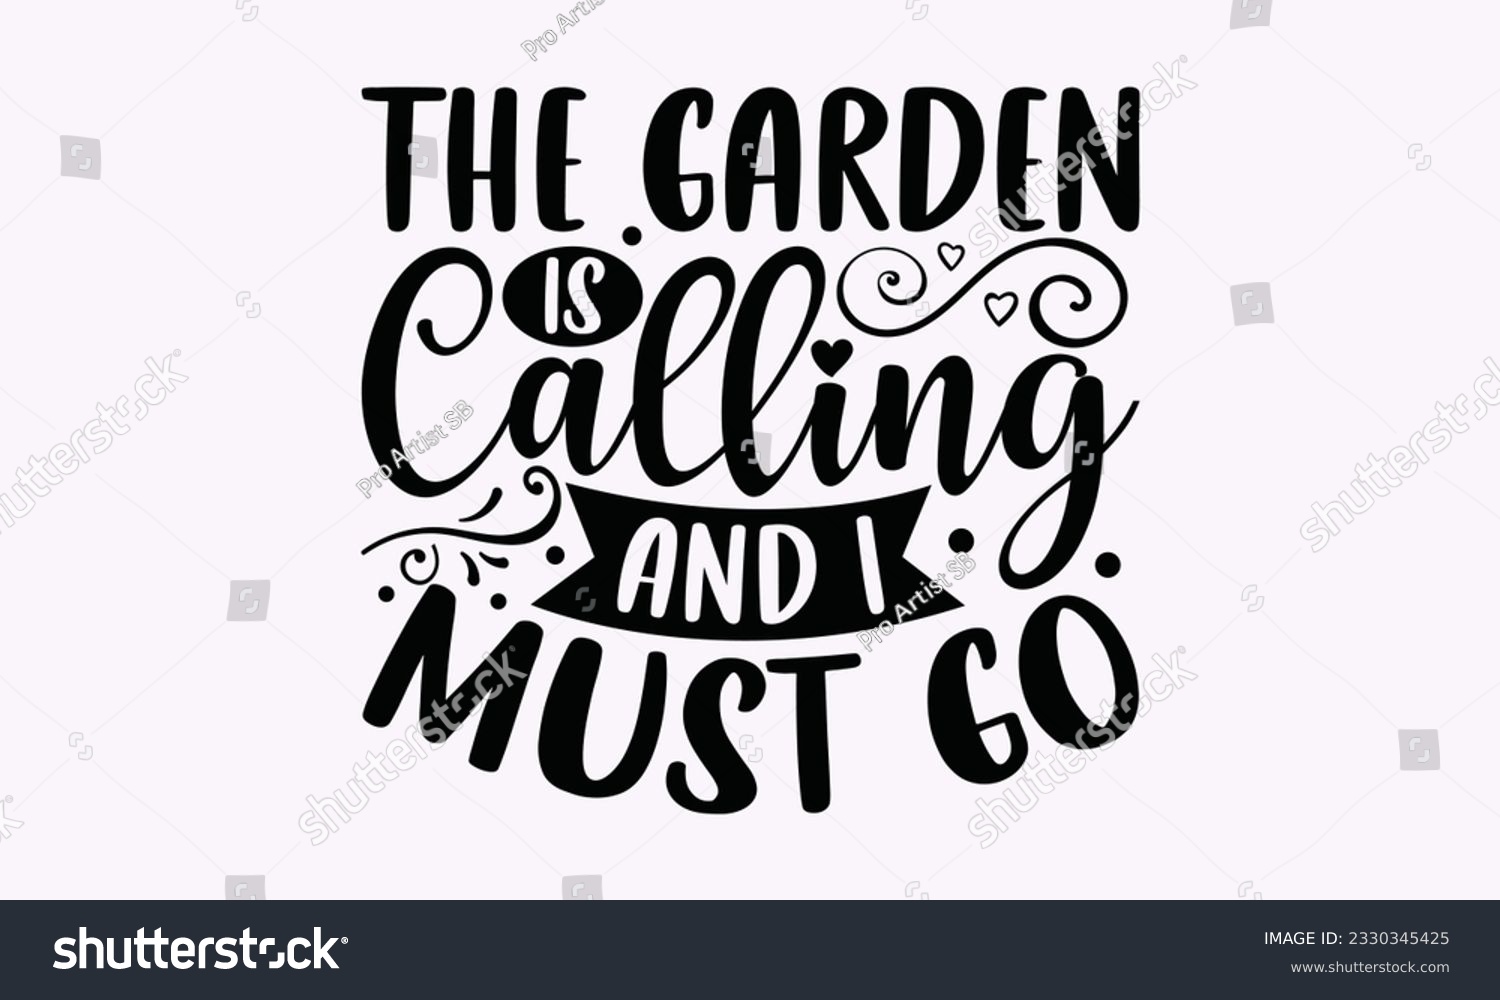 SVG of The garden is calling and I must go - Gardening SVG Design, plant Quotes, Hand drawn lettering phrase, Isolated on white background. svg